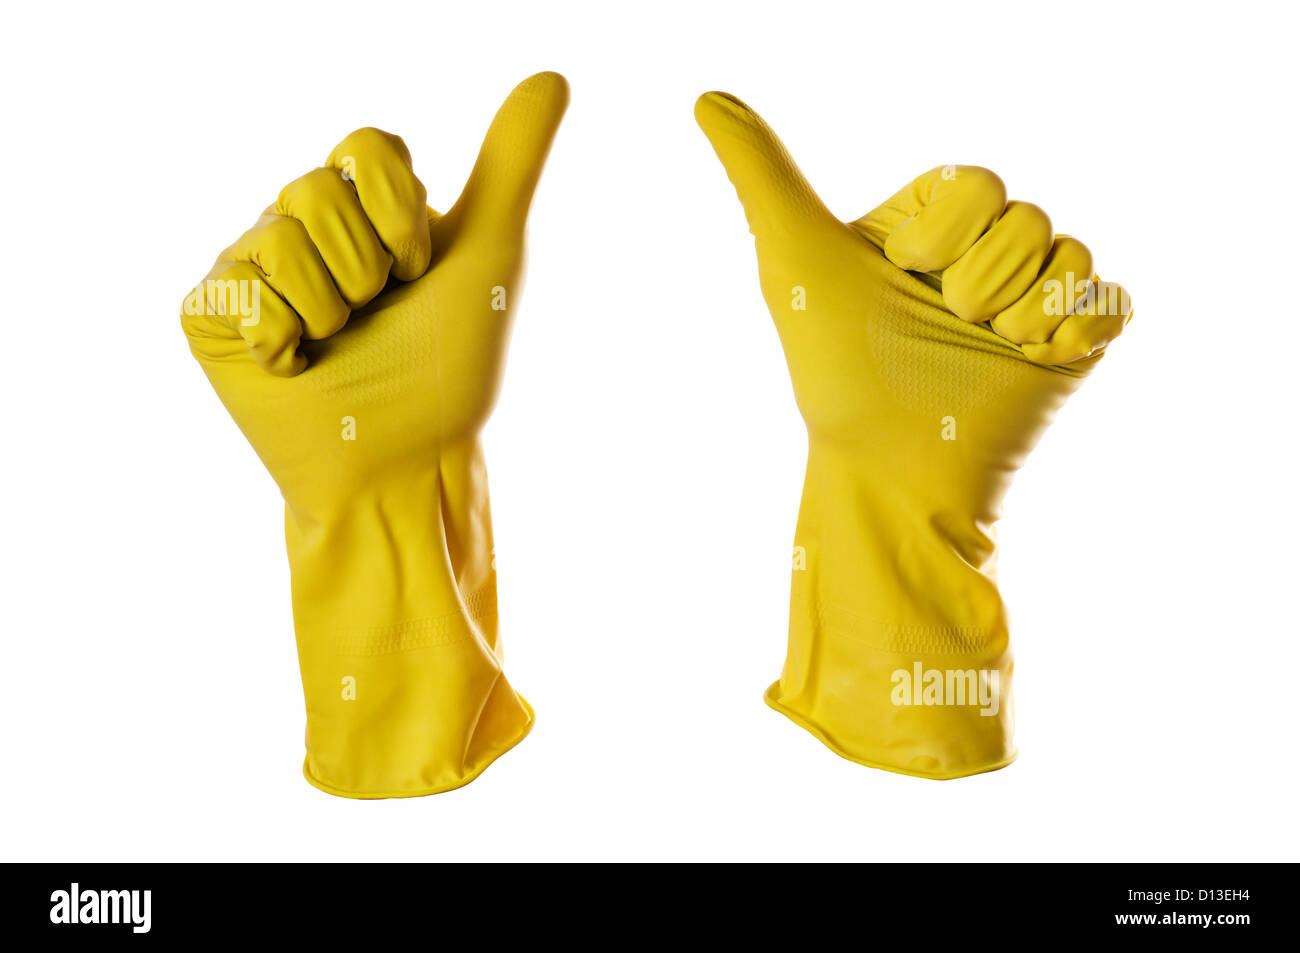 ok sign yellow rubber gloves on white with clipping path Stock Photo